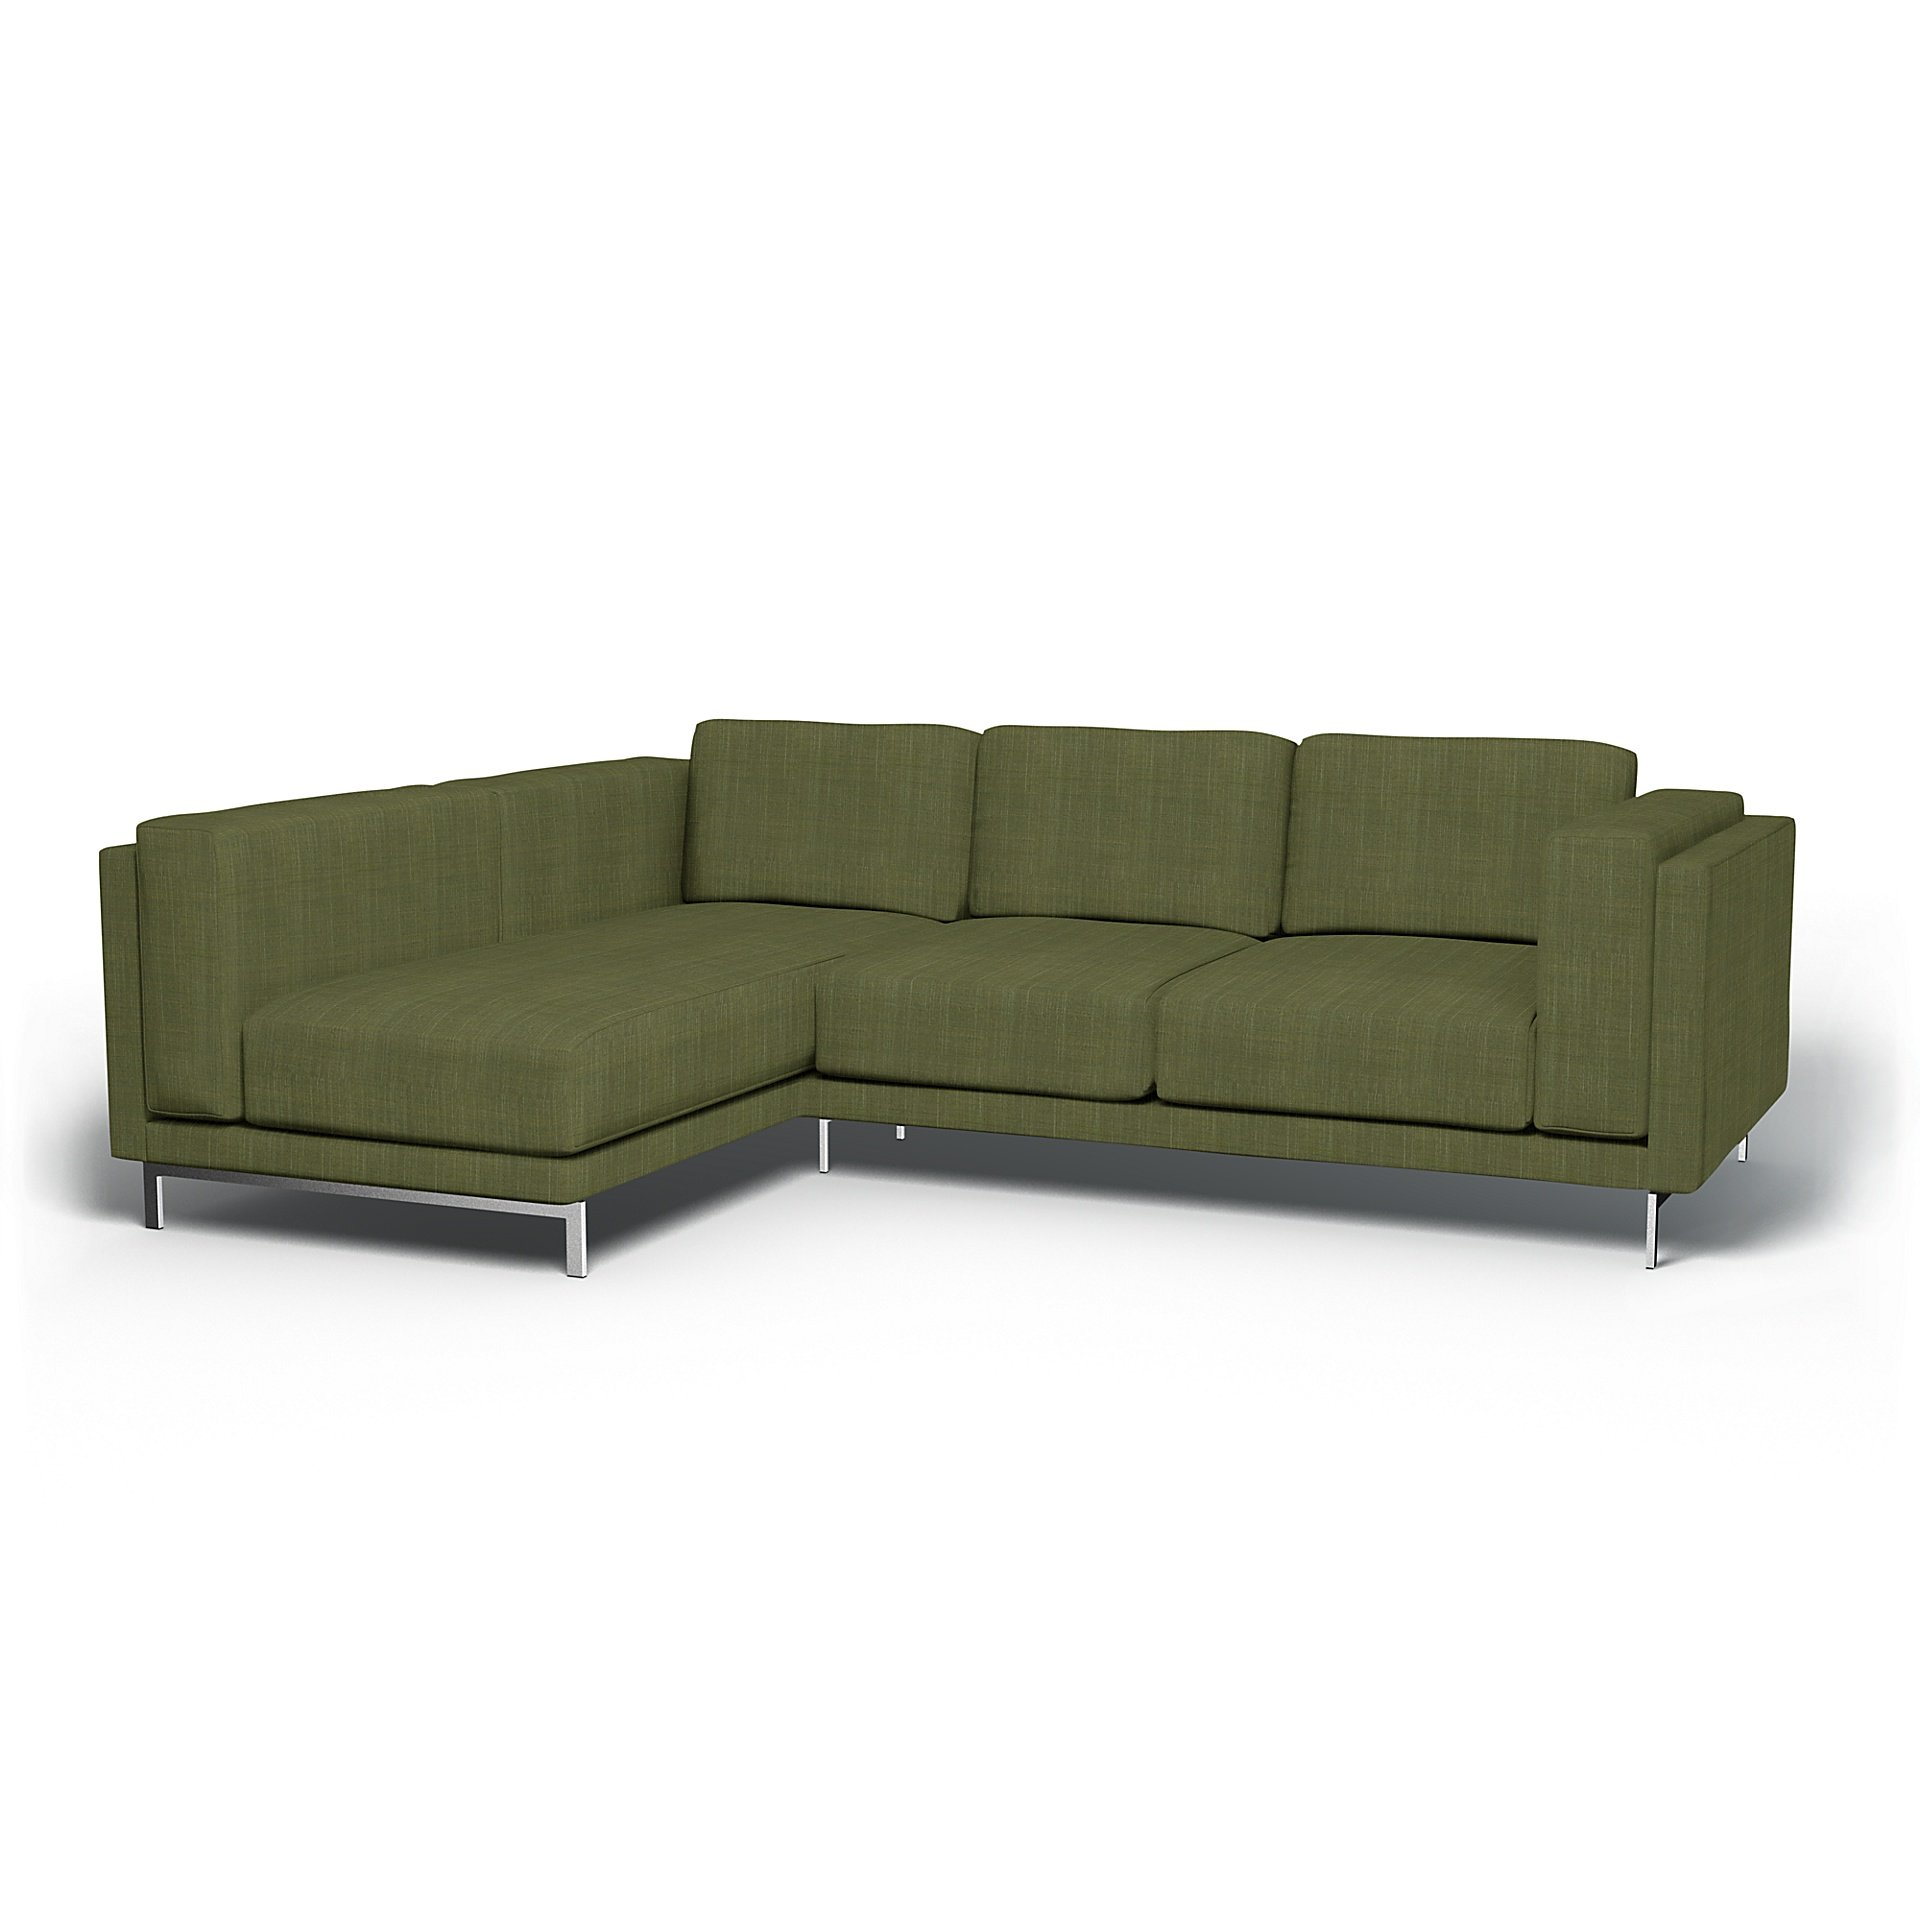 IKEA - Nockeby 3 Seater Sofa with Left Chaise Cover, Moss Green, Boucle & Texture - Bemz